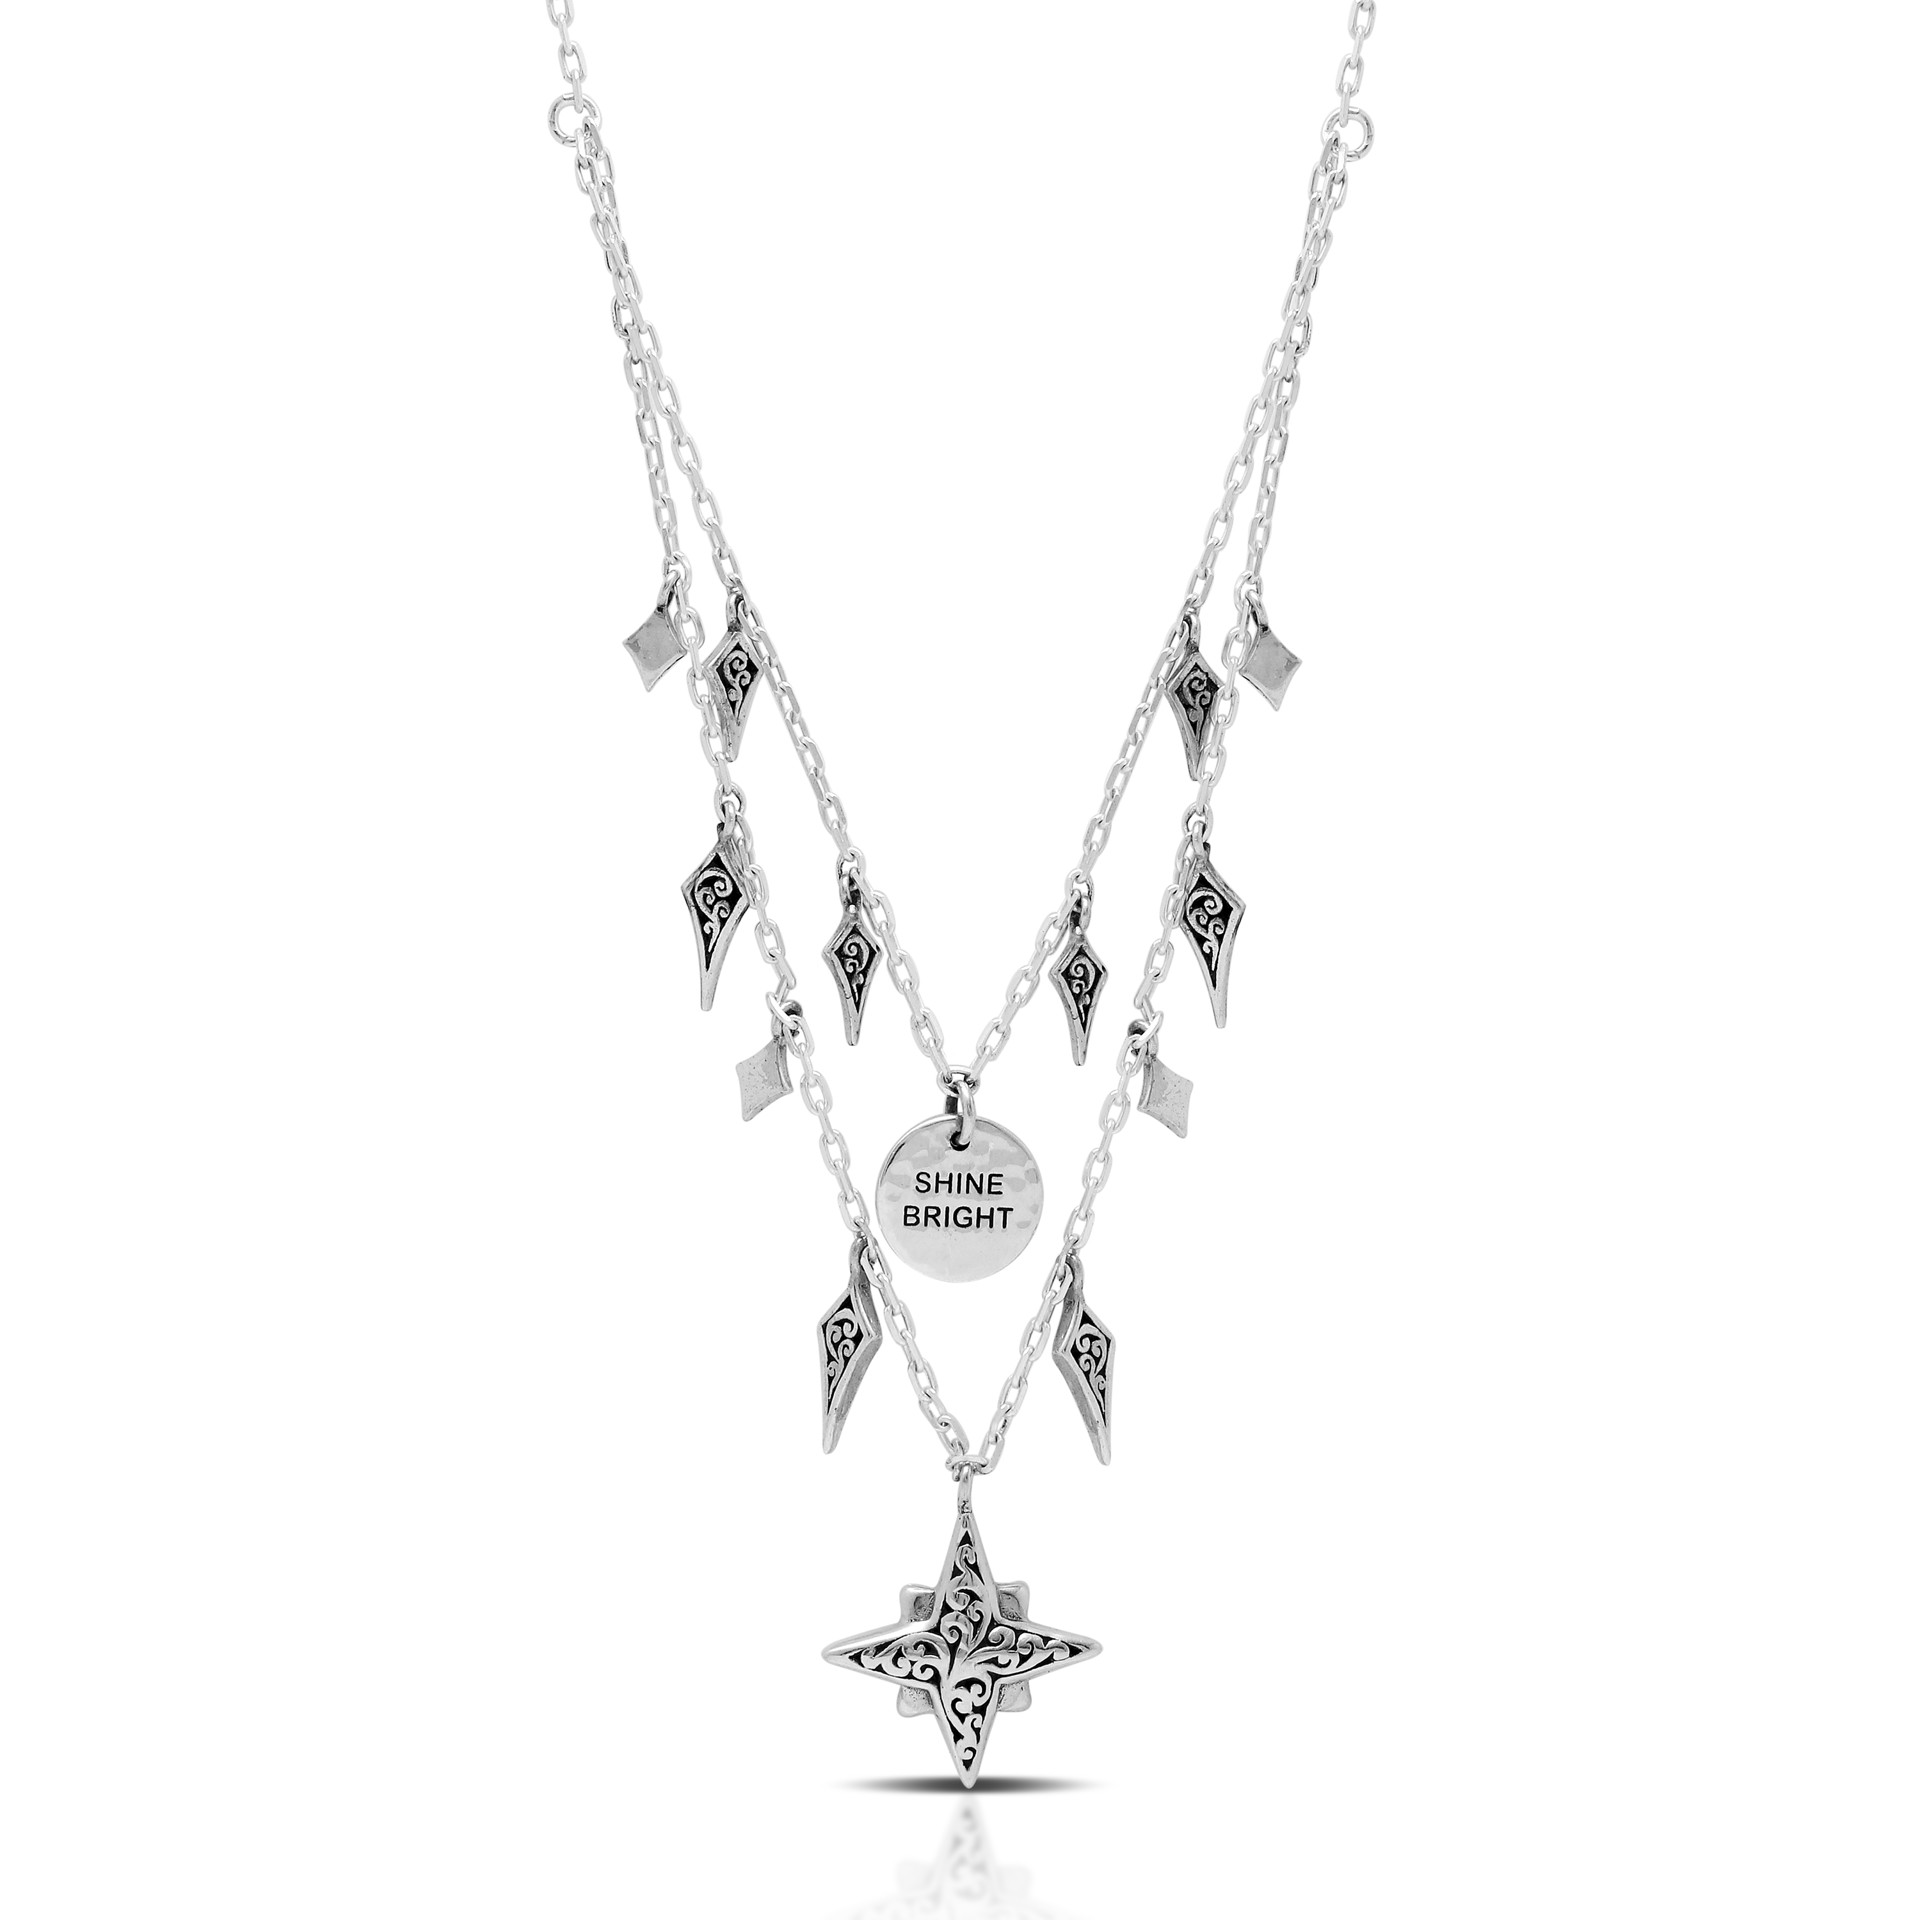 Sterling Silver Layered Star Necklace with "Shine Bright" Pendant by Lois Hill